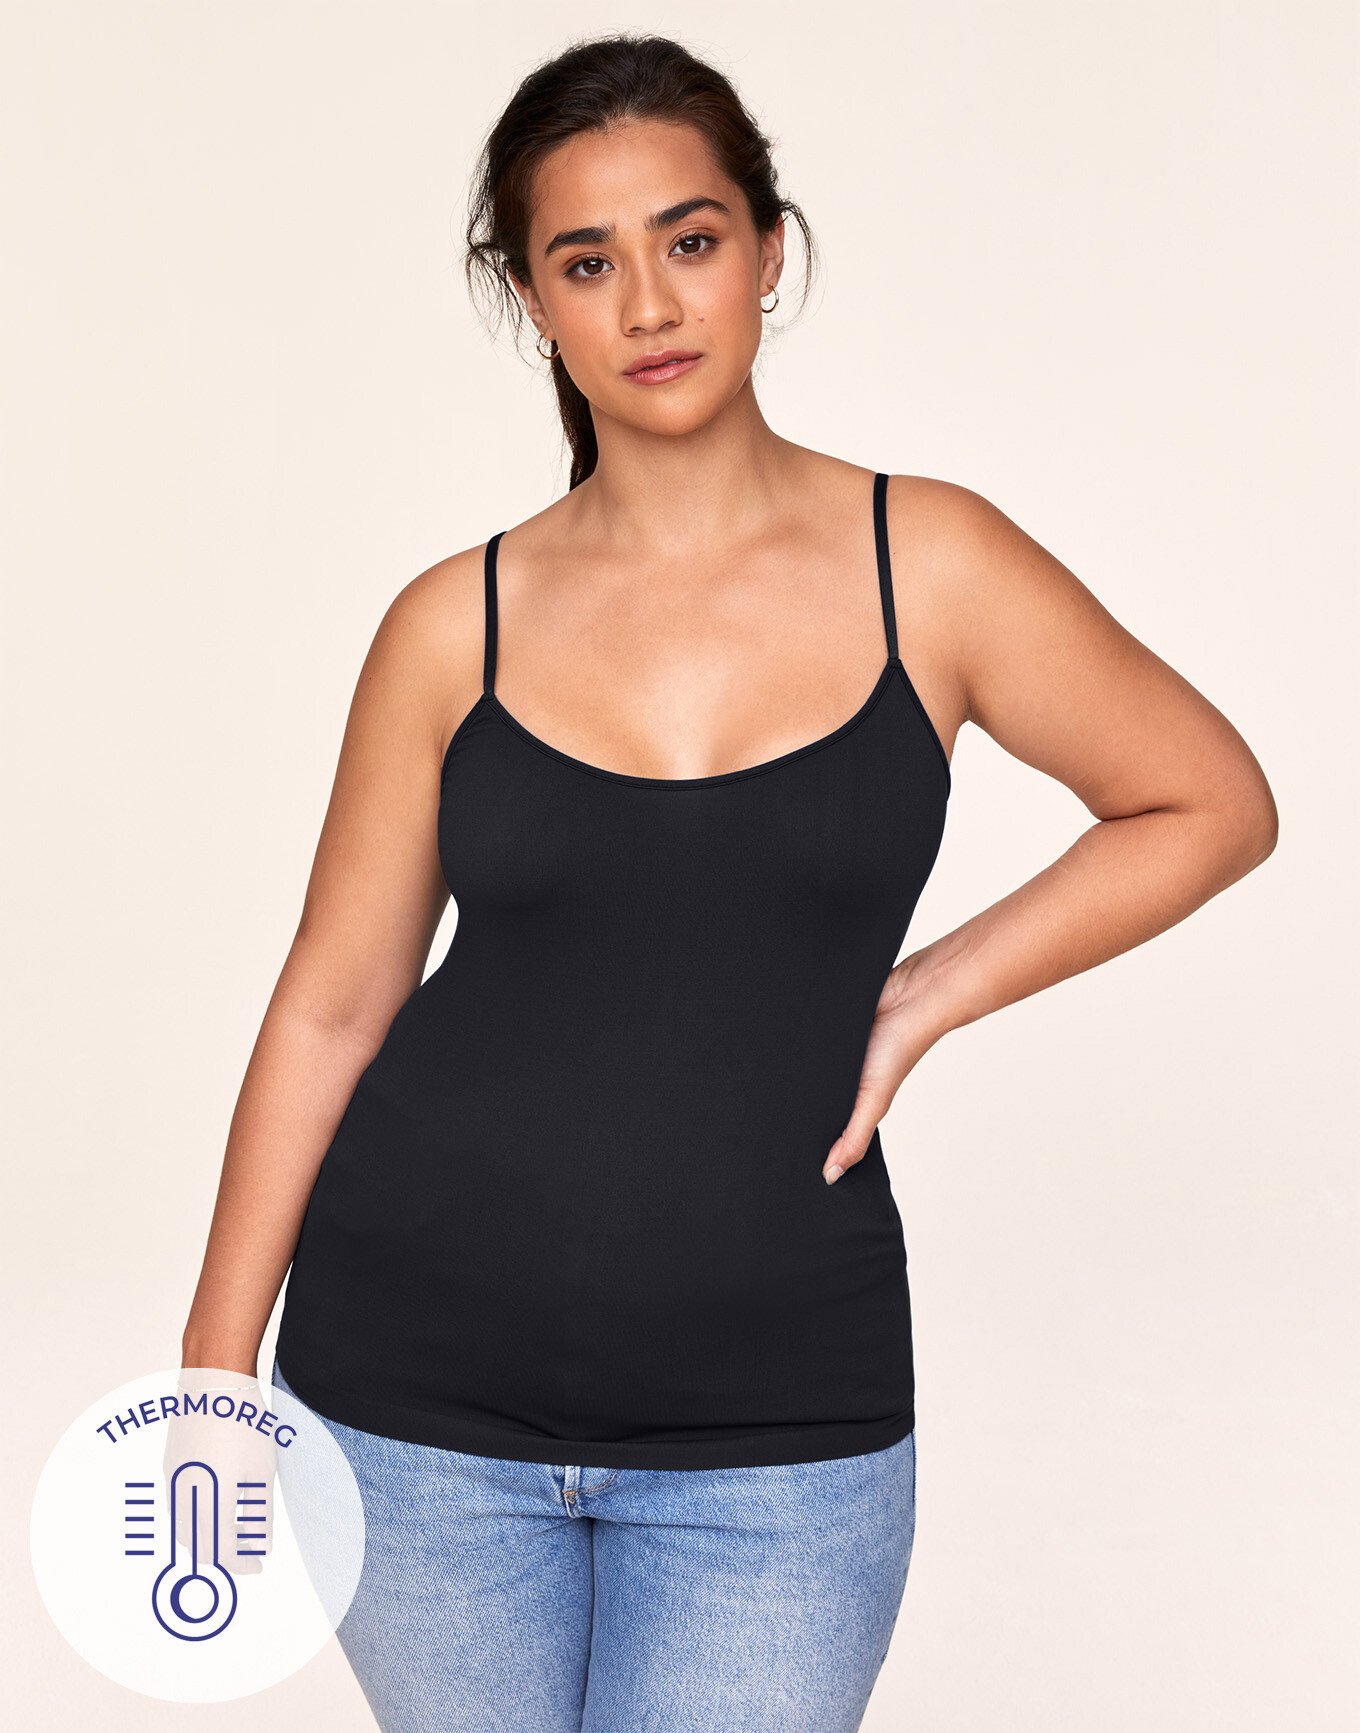  Your Contour Slimming Cami Shaper, Seamless Camisole